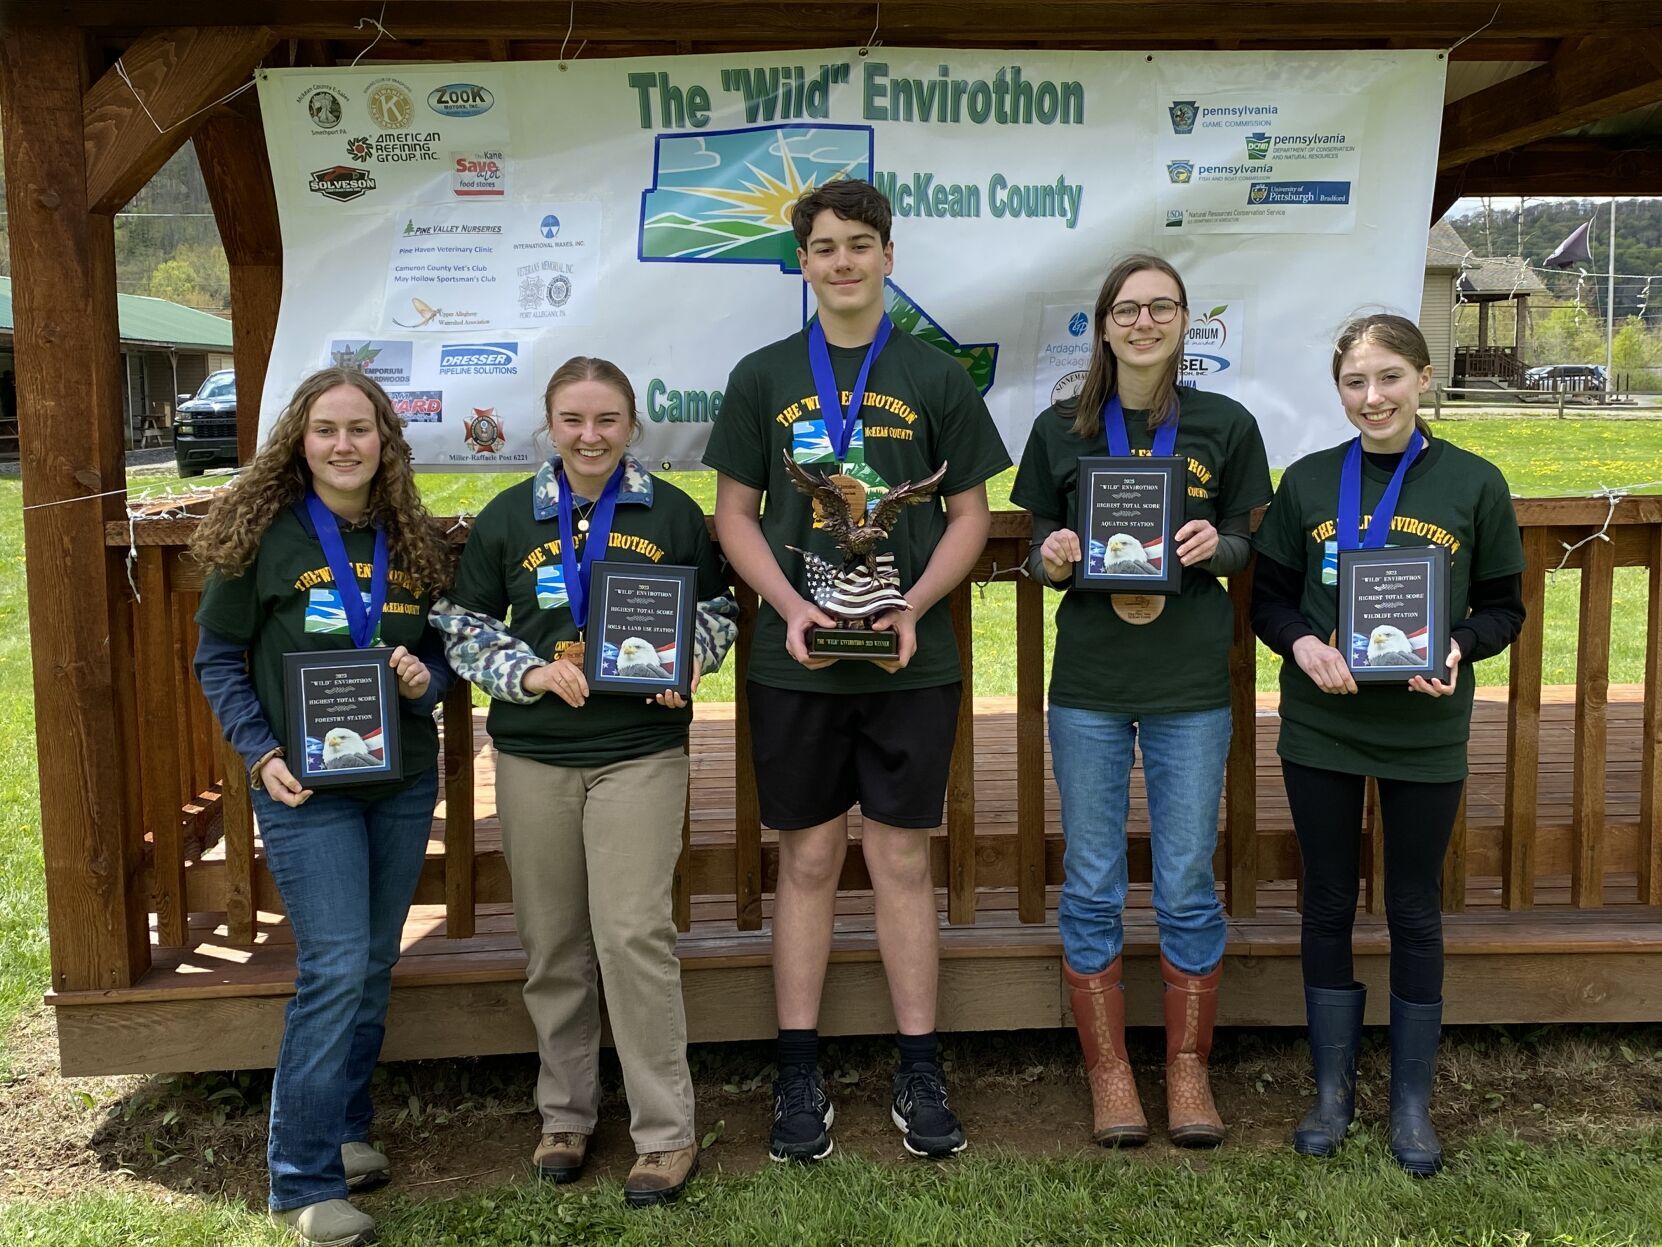 McKean and Cameron County's “Wild” Envirothon held Thursday | News